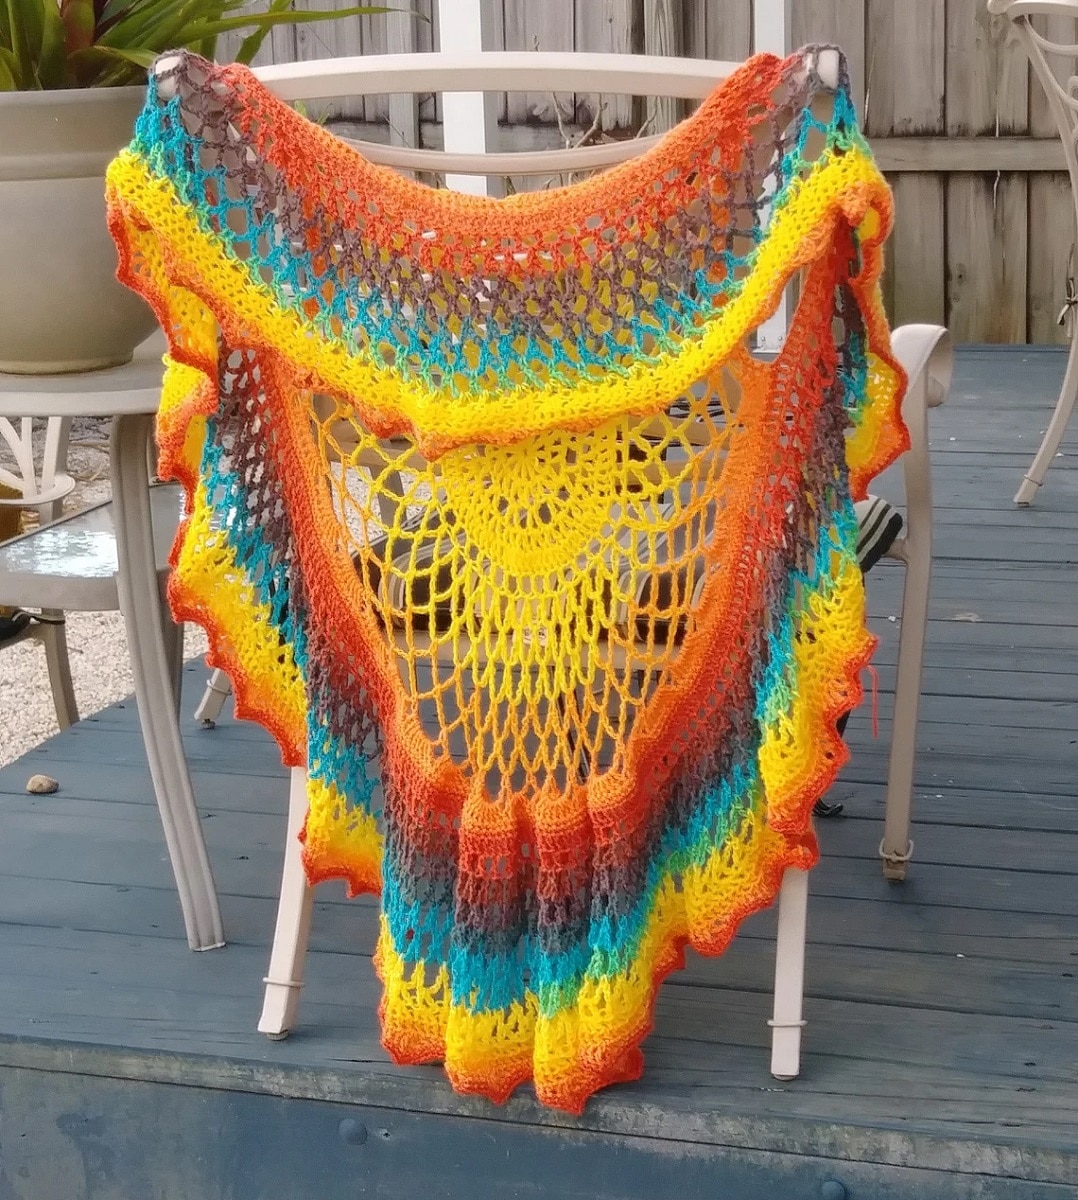 Rainbow colored striped crochet vest with a large yellow mandala in the center draped over the back of a chair.